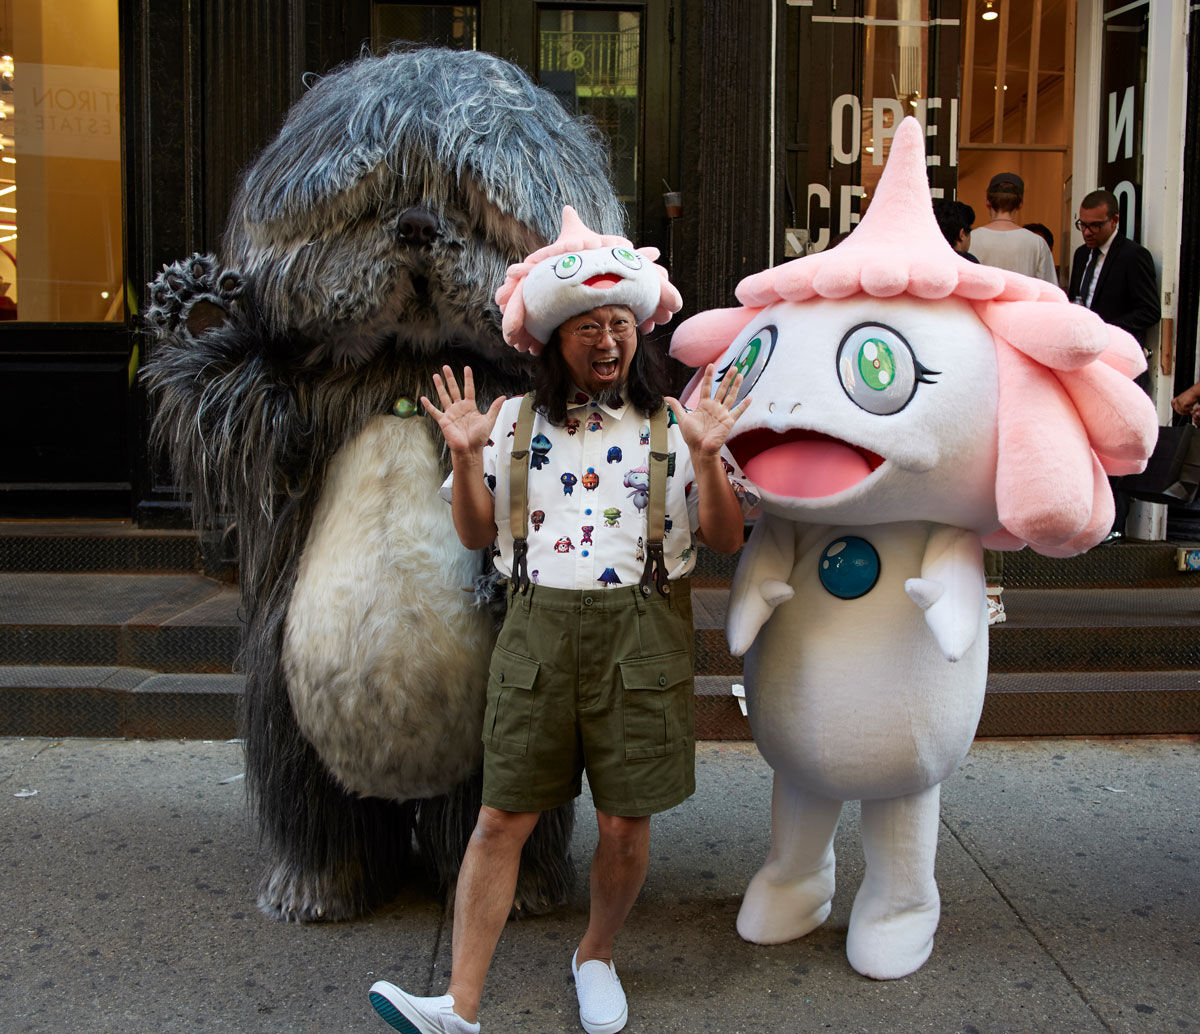 Takashi Murakami with charcters from his film Jellyfish Eyes at the IFC Center, New York, 2015. Courtesy of Janus Films and Gagosian.